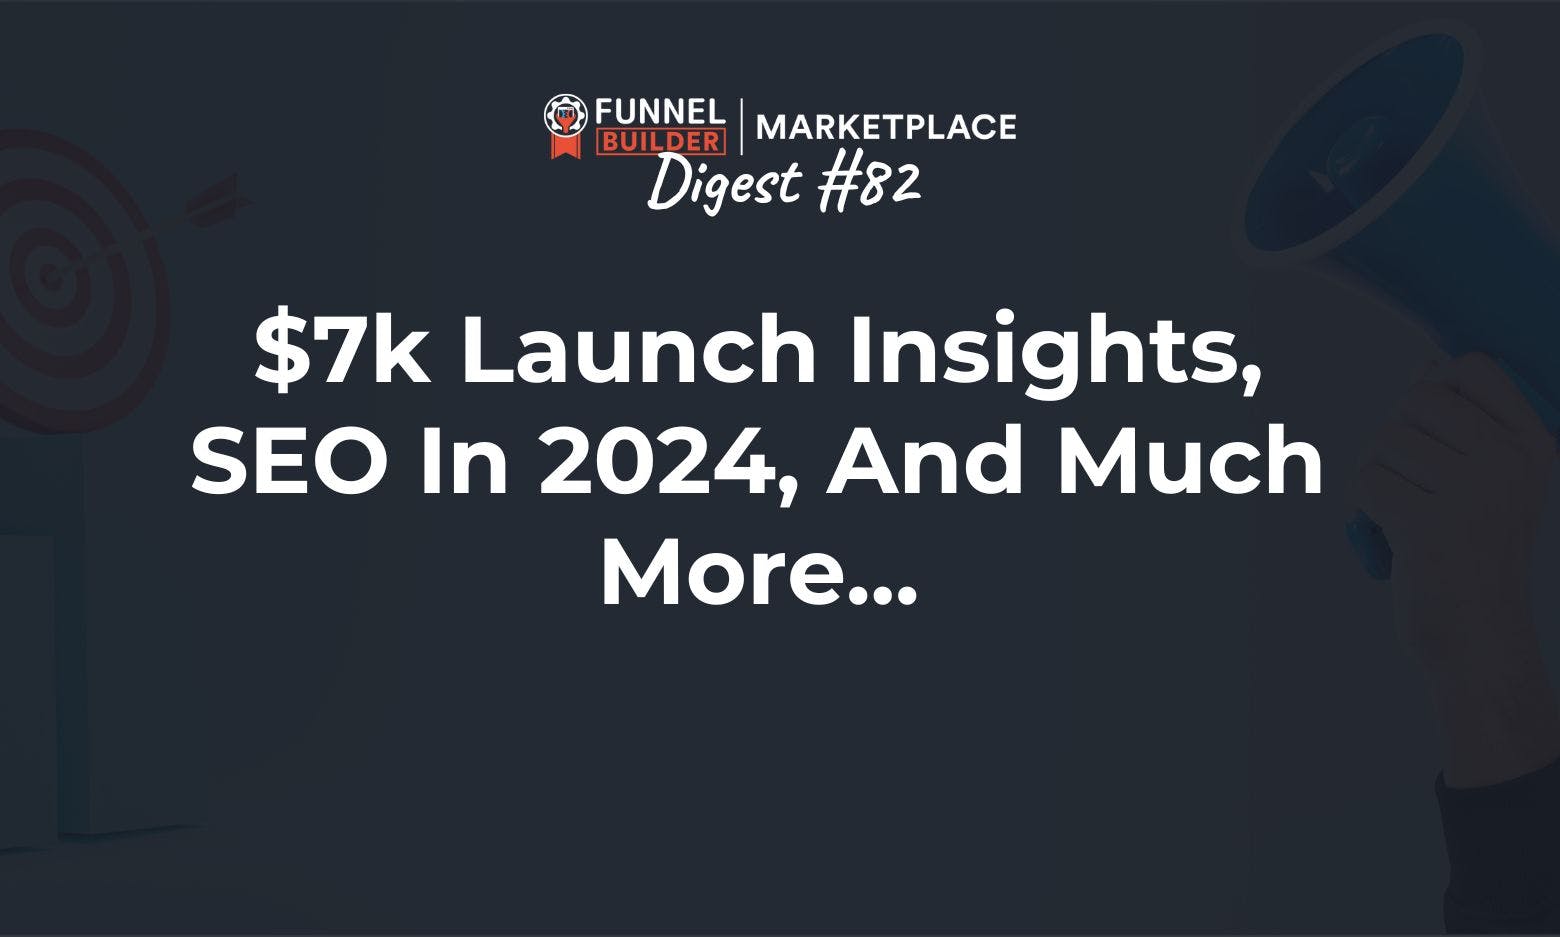 FBM Digest #82: $7k launch insights, SEO in 2024, and much more...